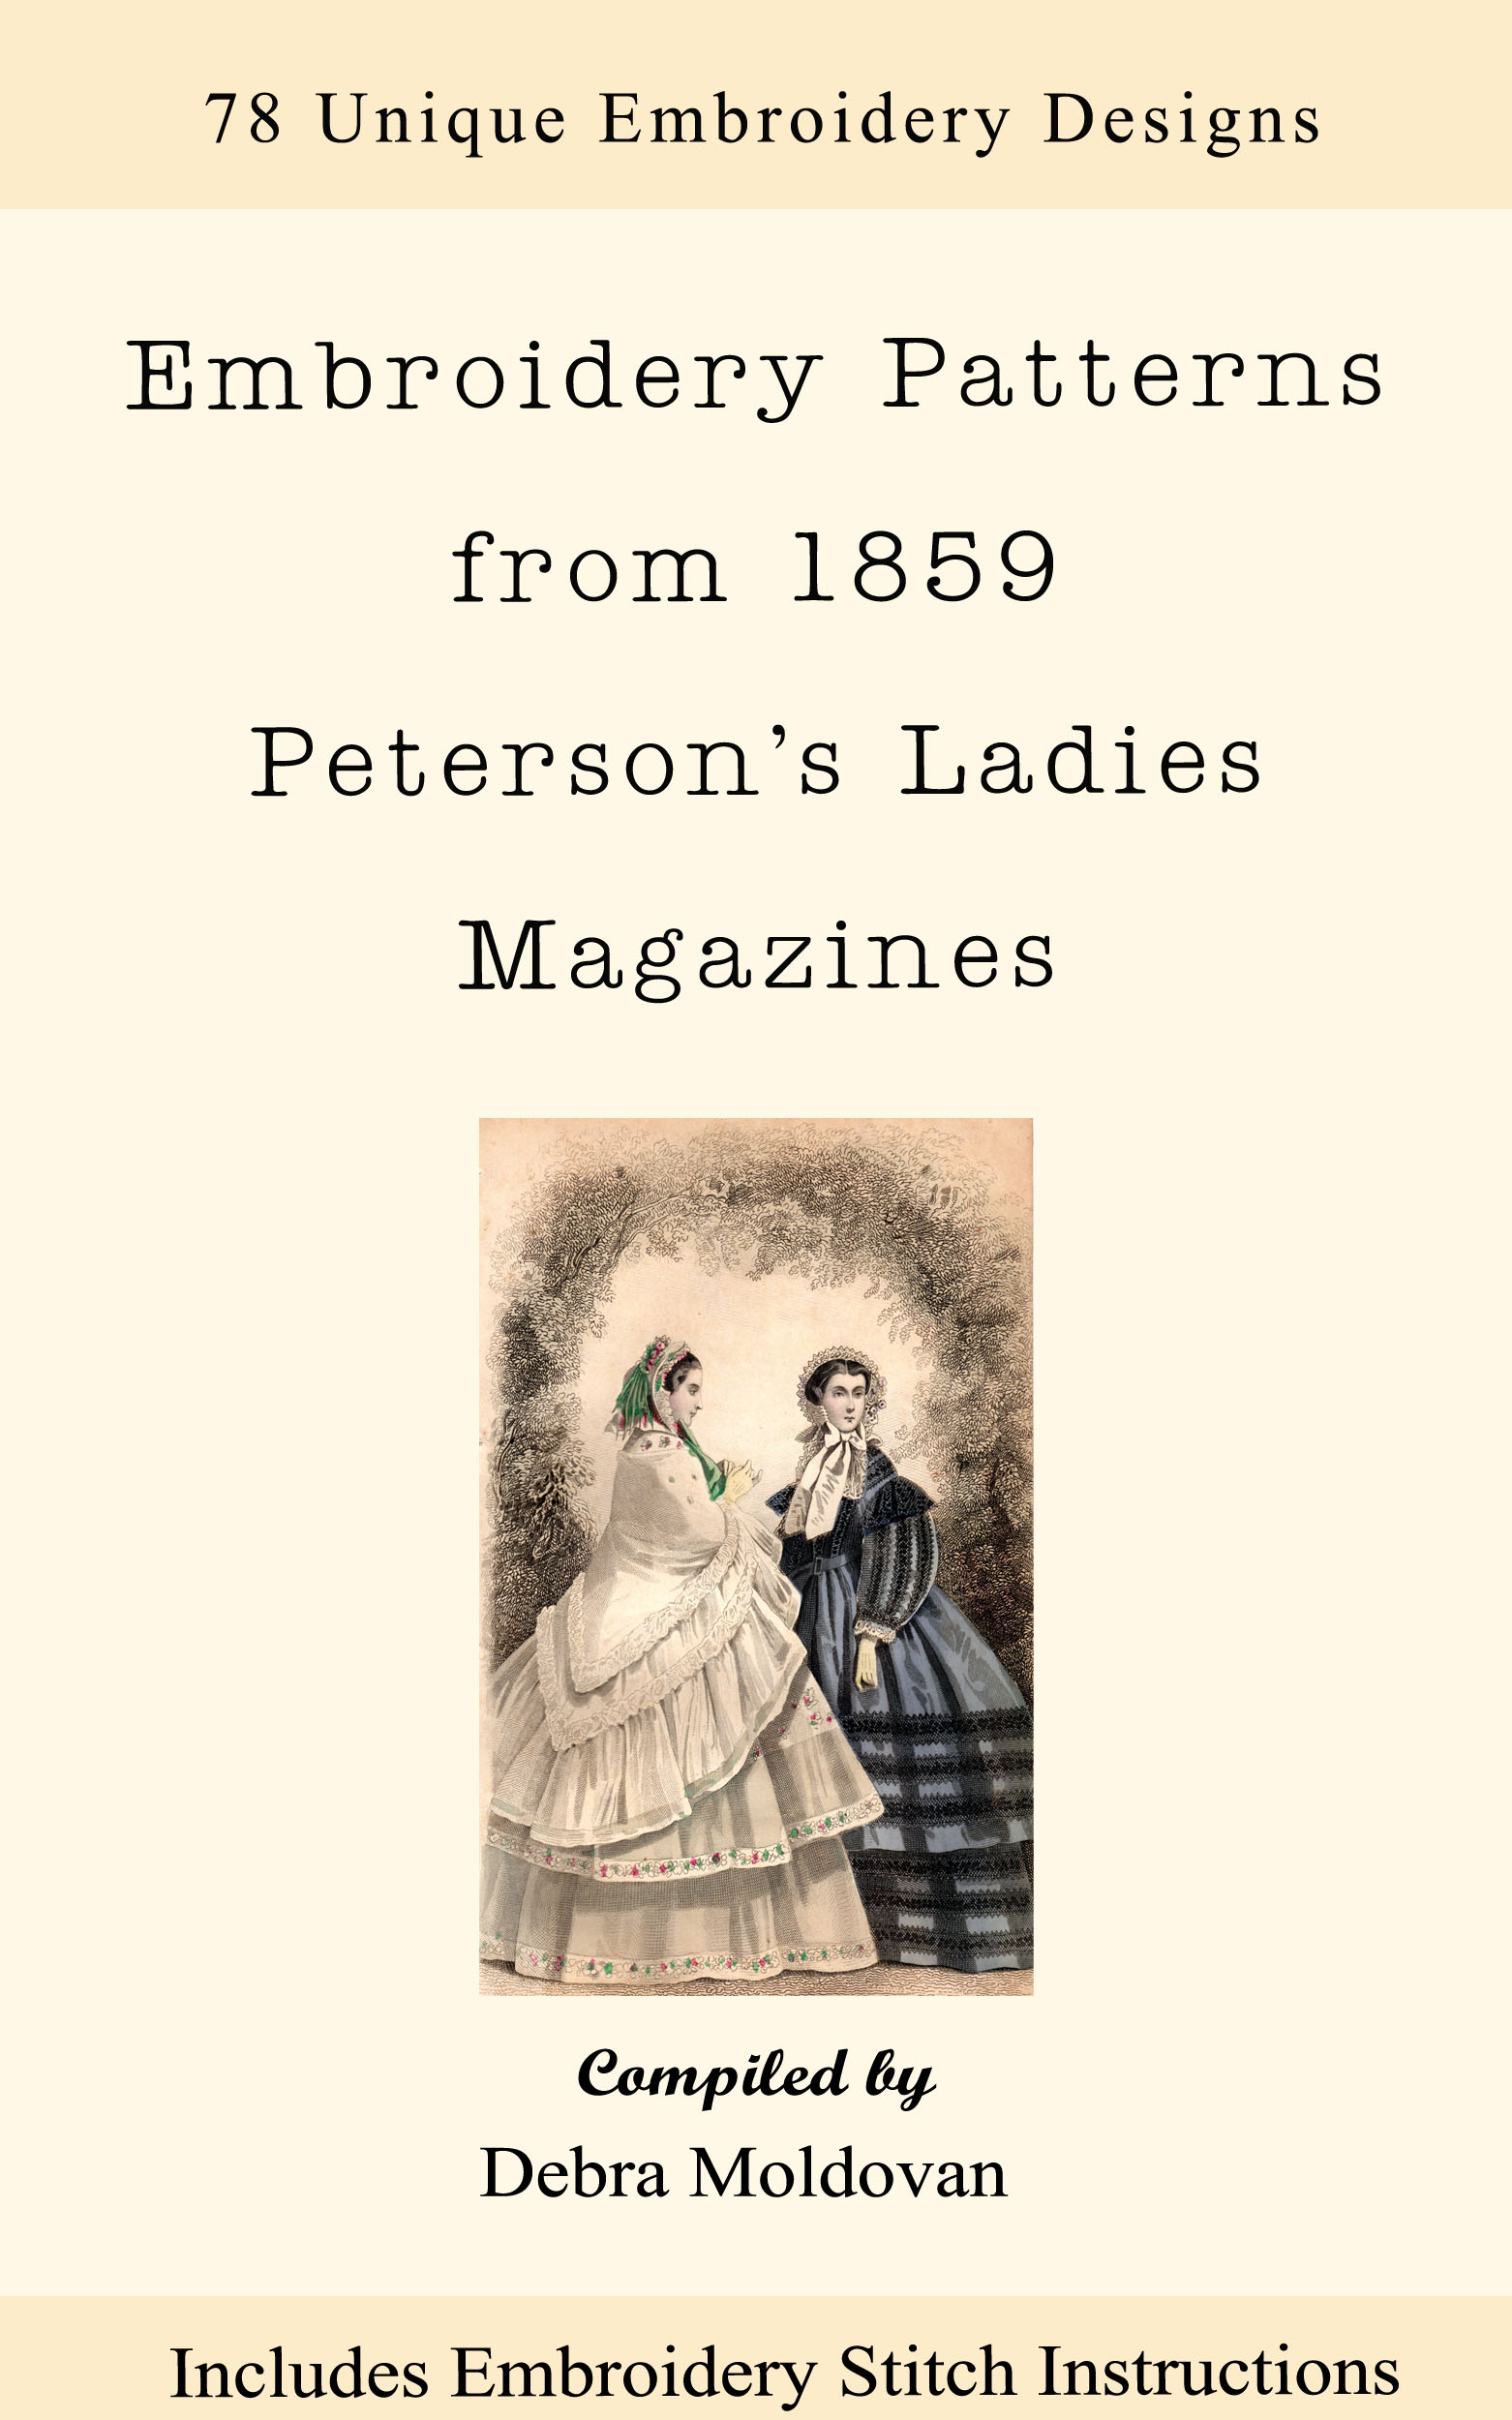 Victorian Embroidery Patterns Embroidery Patterns Pdf Ebook Designs From An 1859 Petersons